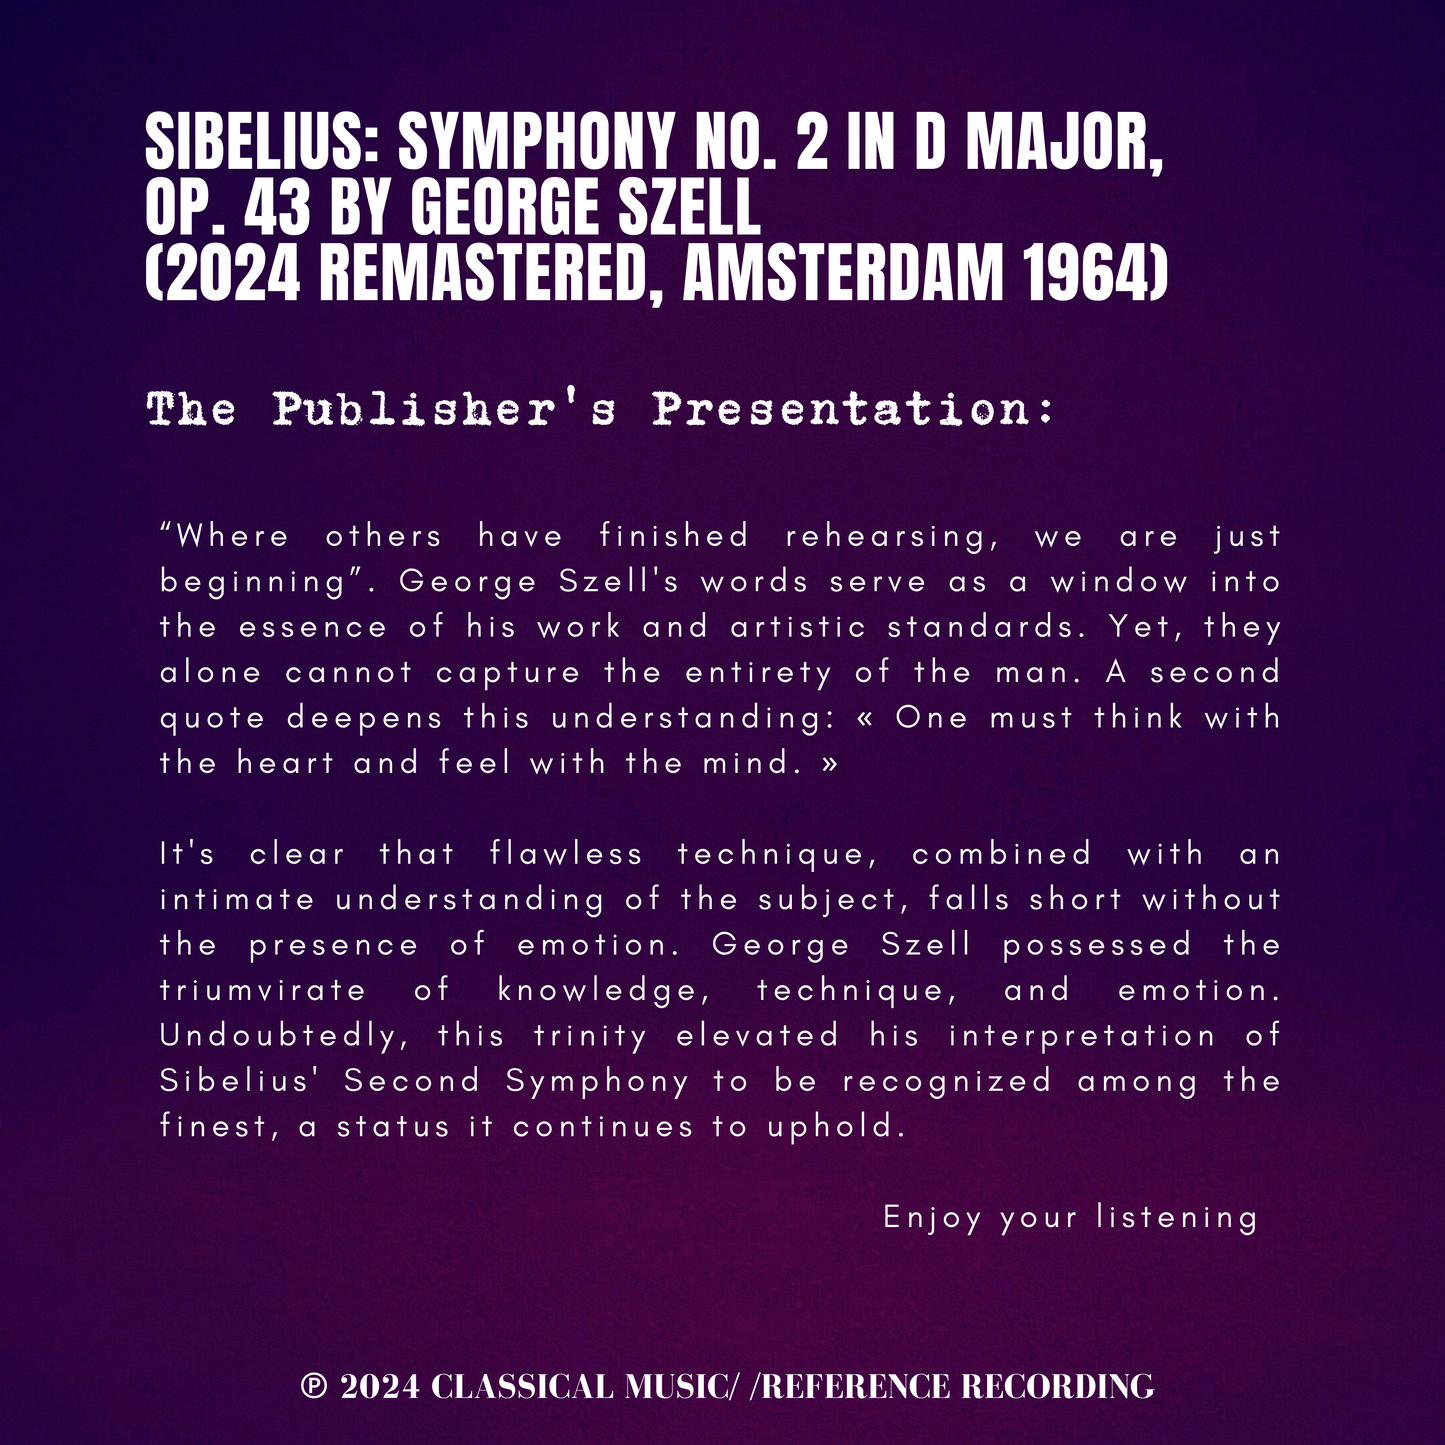 Sibelius_Symphony No. 2 in D Major, Op. 43 by George Szell (2024 Remastered_Amsterdam 1964)